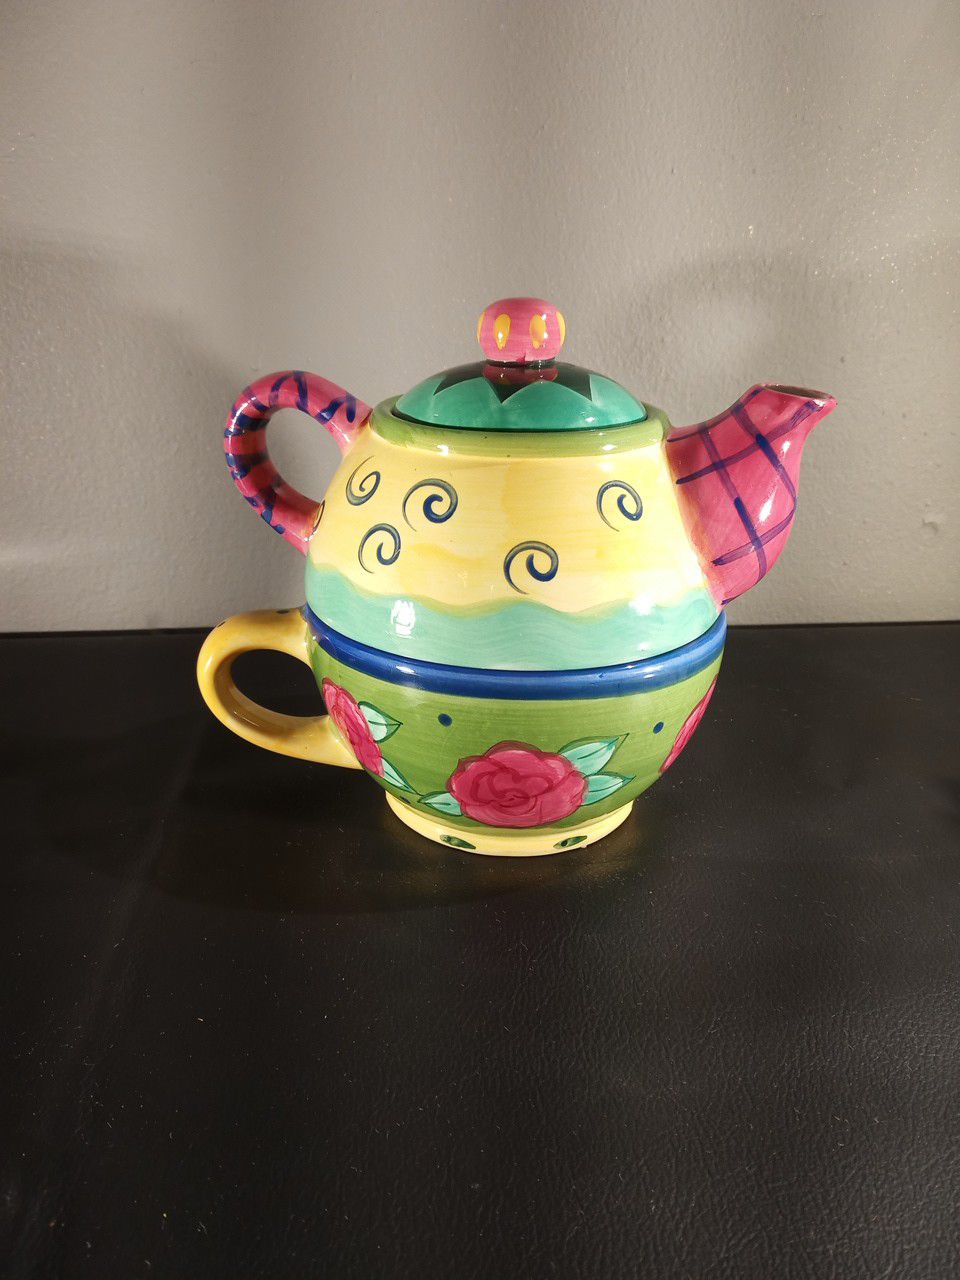 Tea/coffee cup and pot.